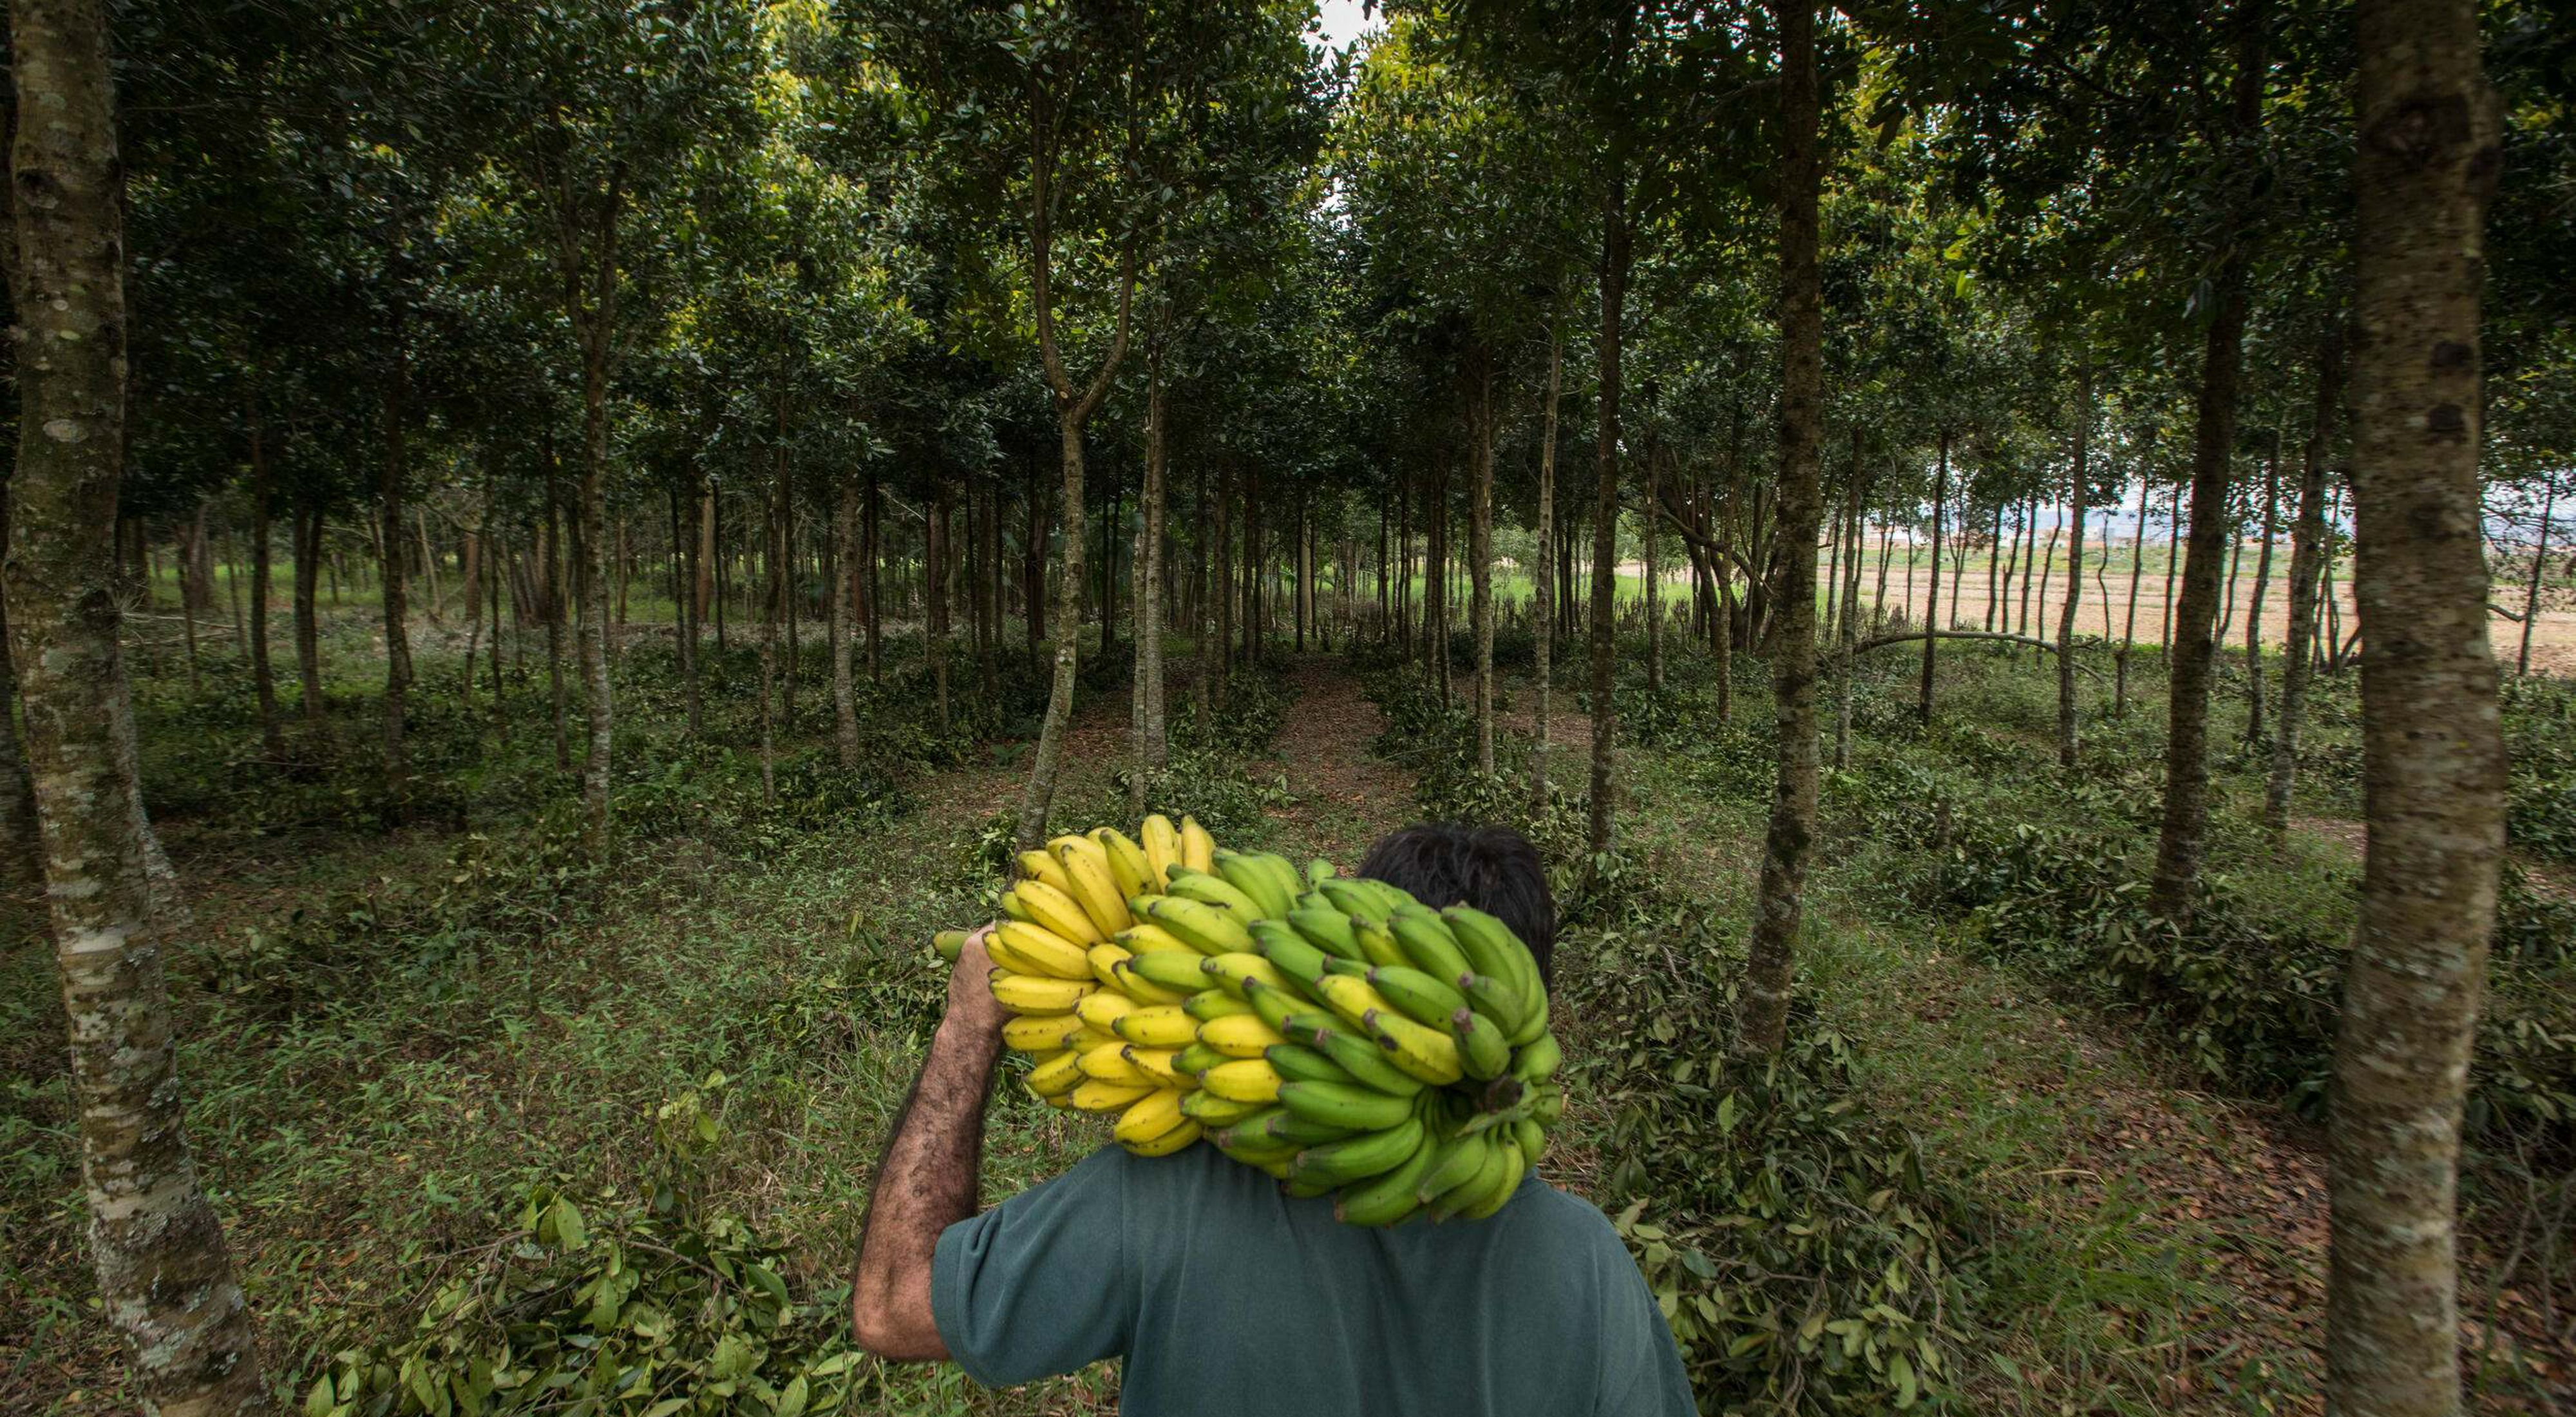 Farmer carries a bunch of bananas through agroforestry system.